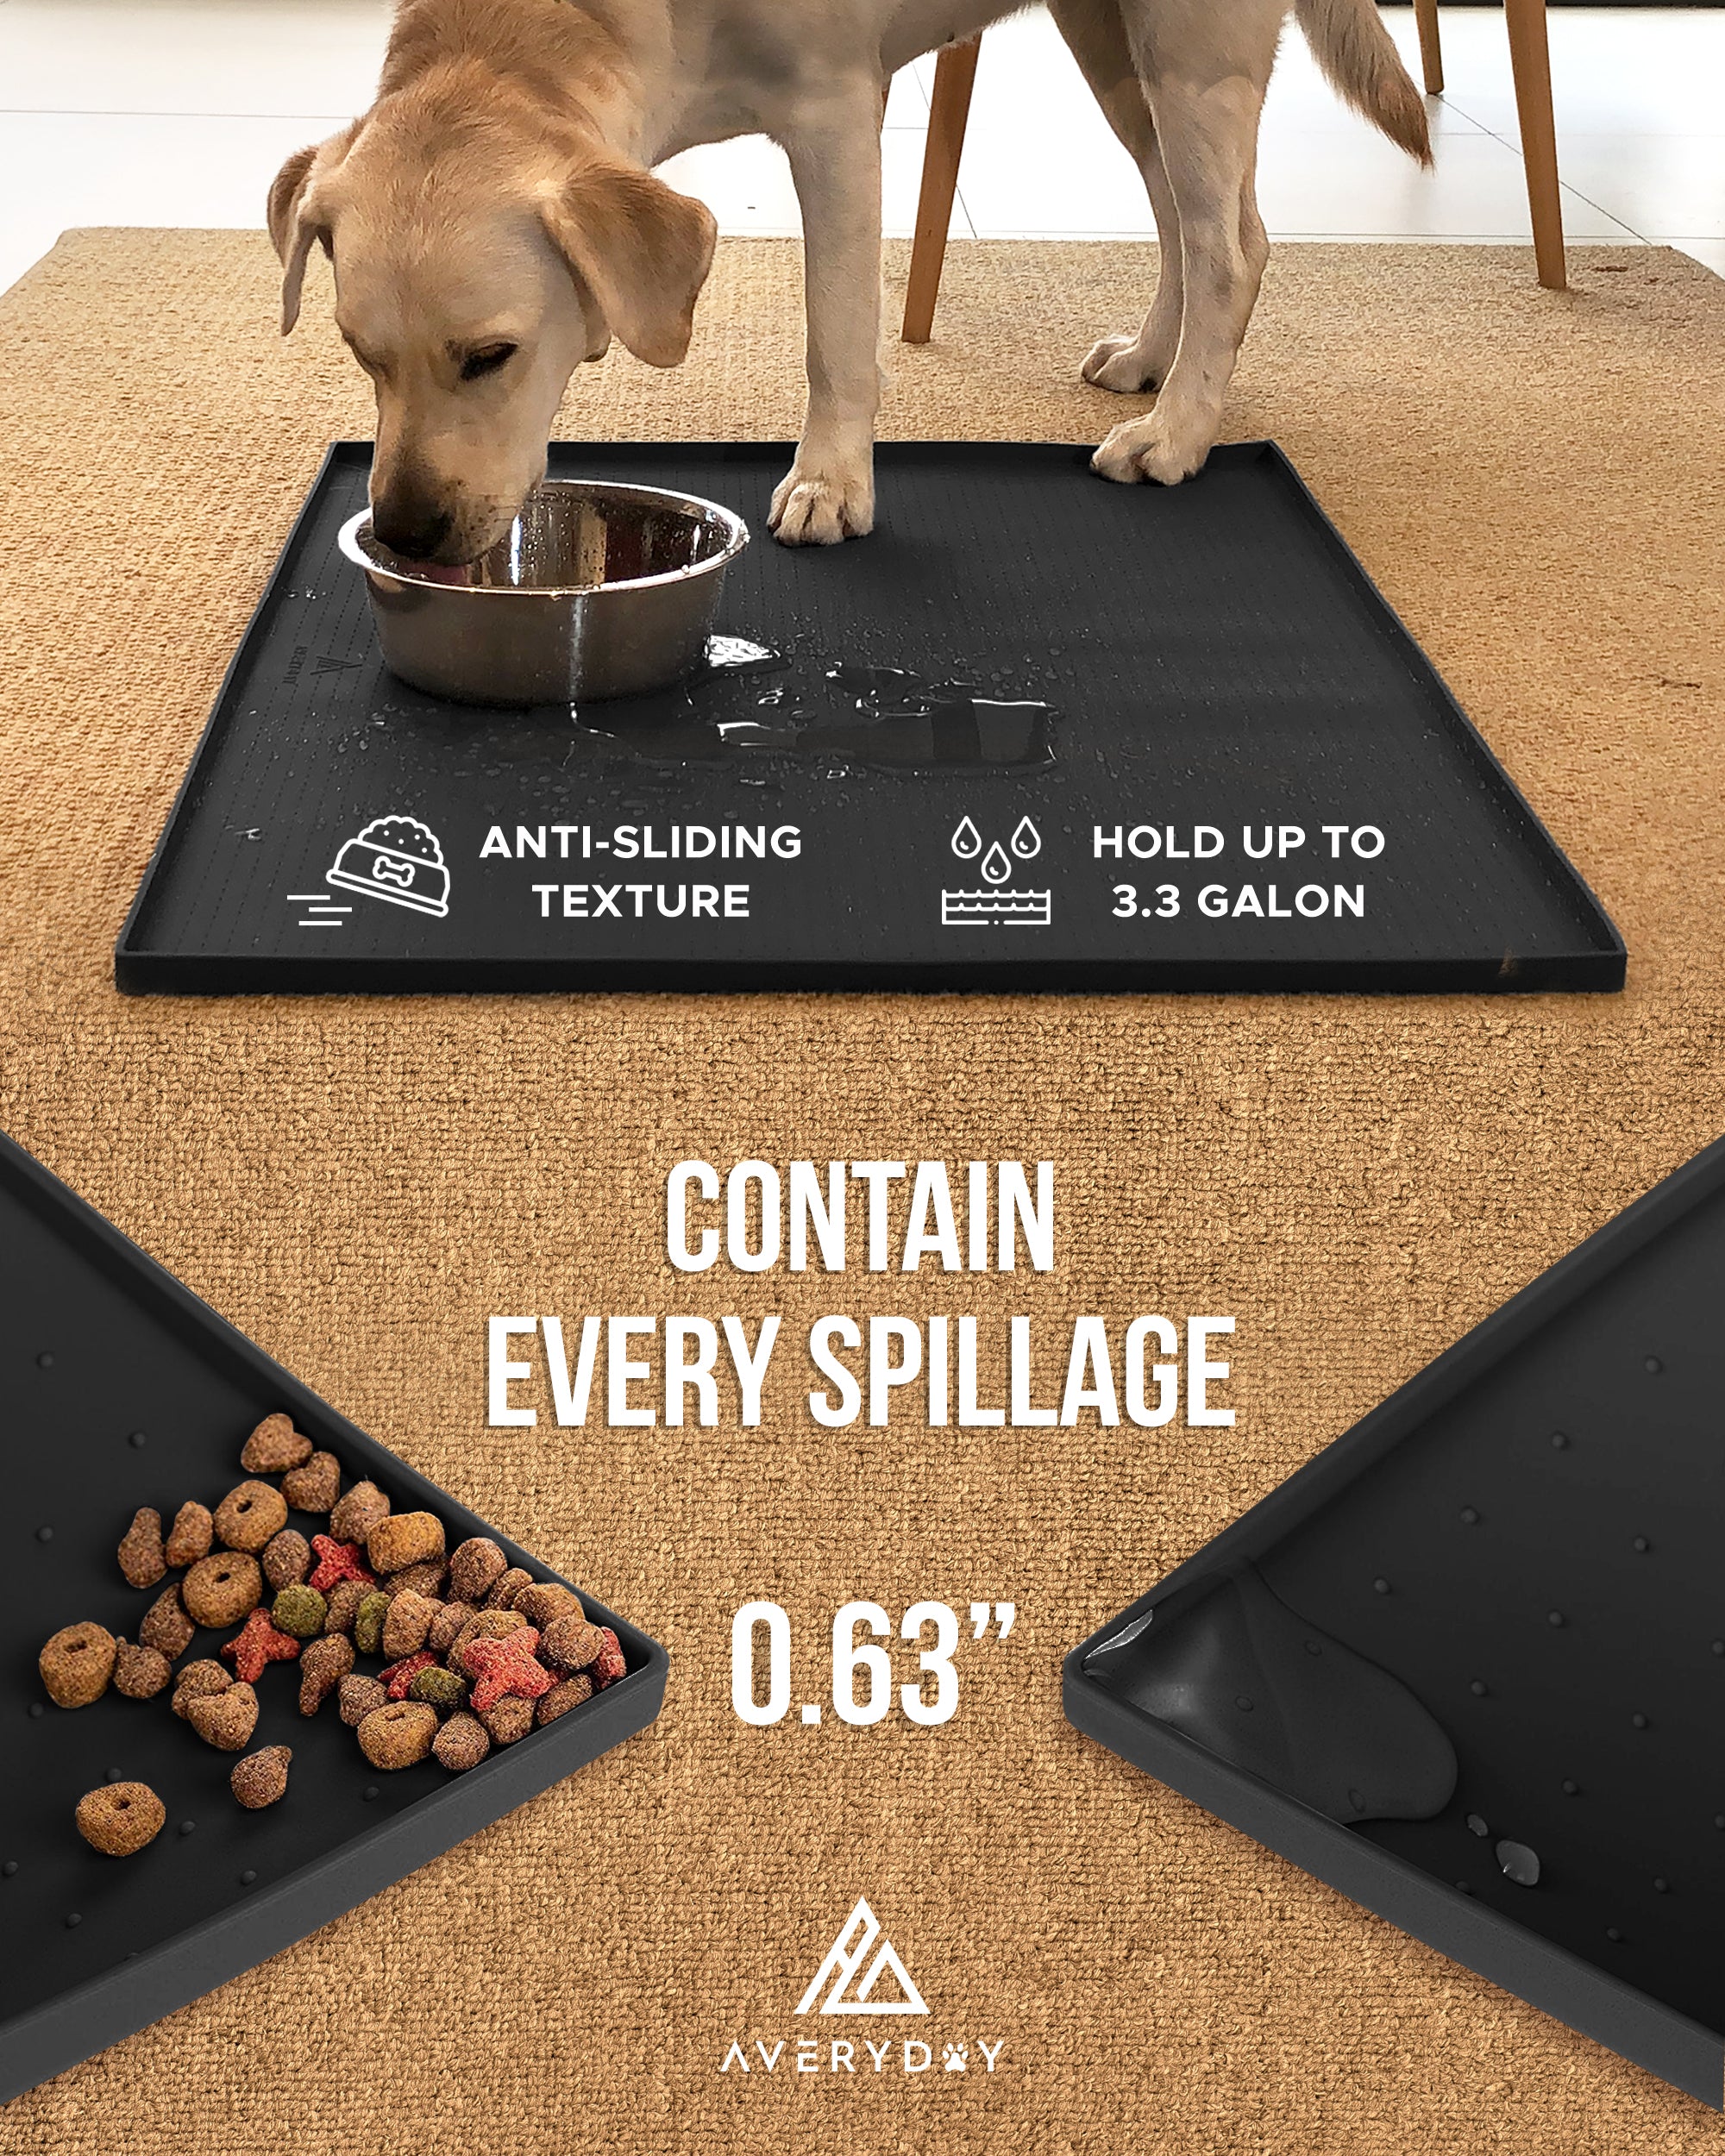 Quick Dry Absorbent Dog Food Mat - 19x12 in Diatom Mud Anti-Slip Dog Water  Bowl Mat, No Stains Pet Feeding Mat for Messy Drinkers Small Dogs - Yahoo  Shopping